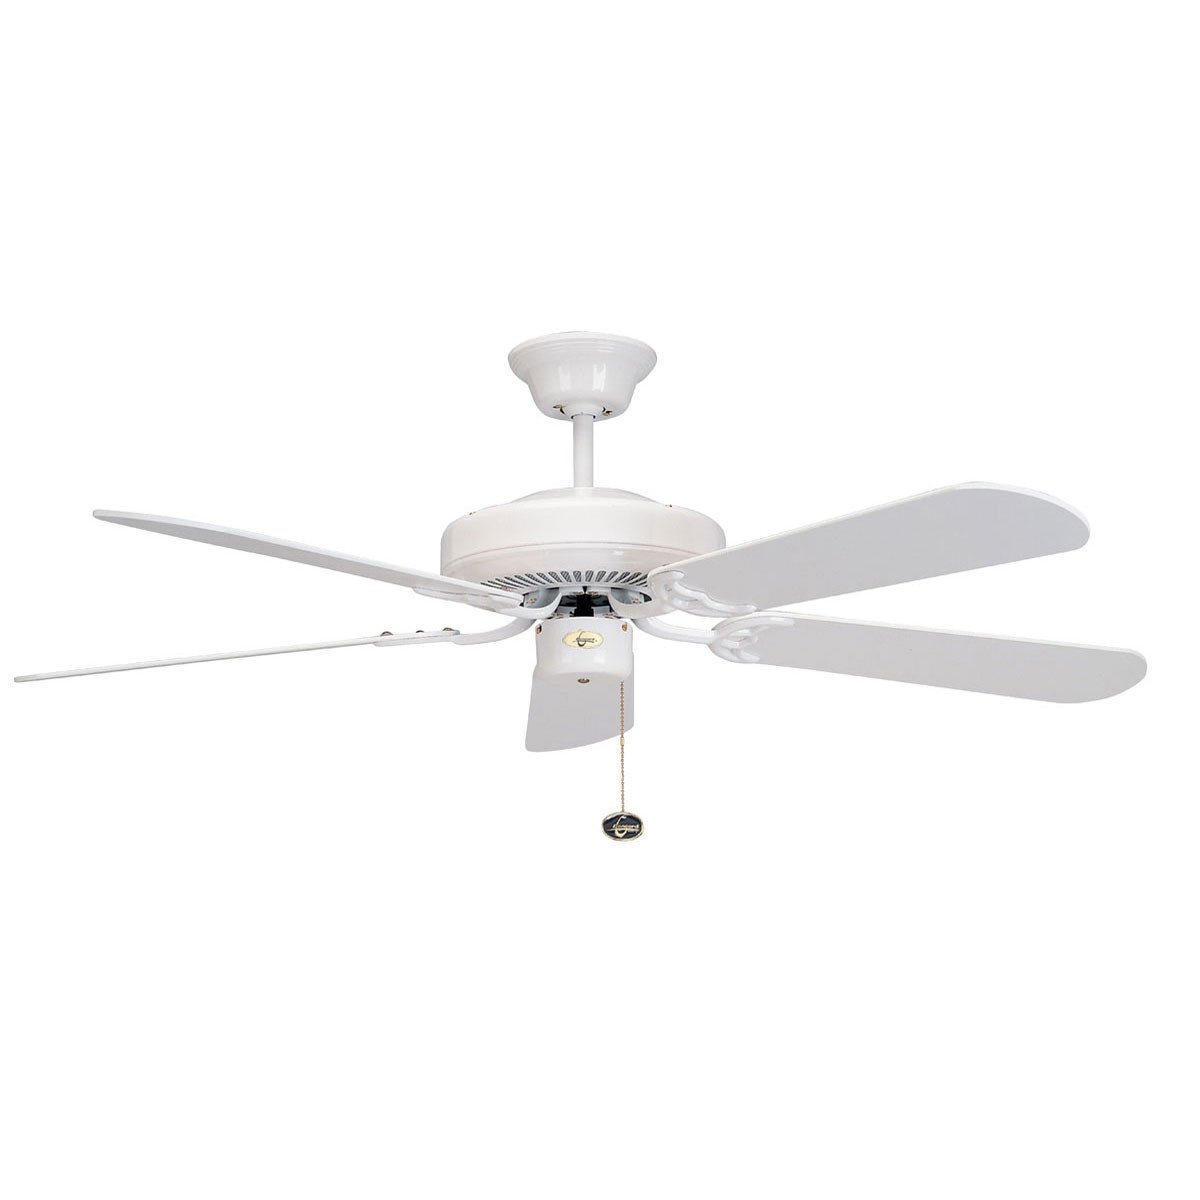 Concord Fans Decorama Energy Saver Modern 52 Small White Ceiling